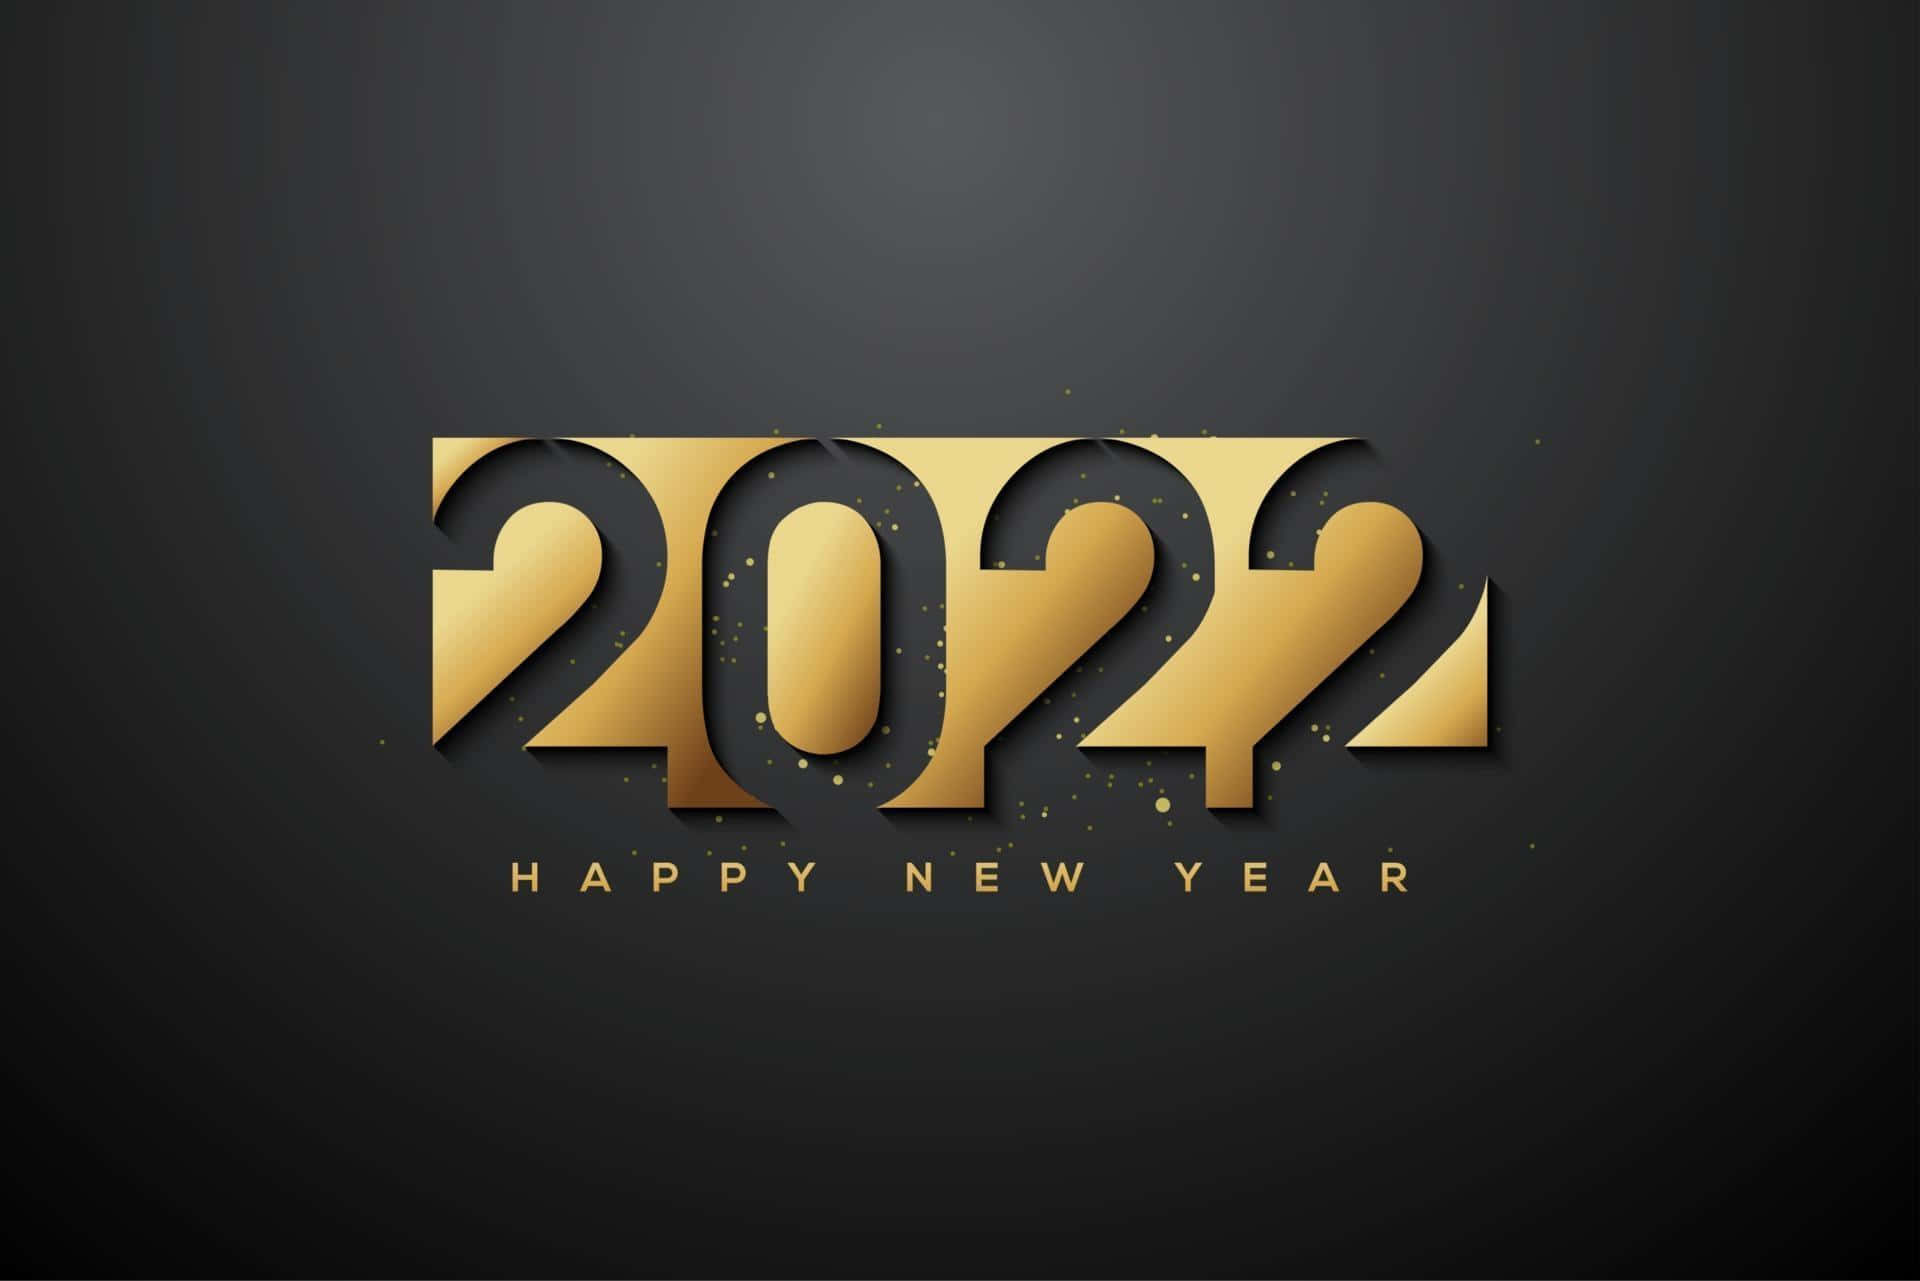 Download Happy New Year 2022 Background | Wallpapers.com